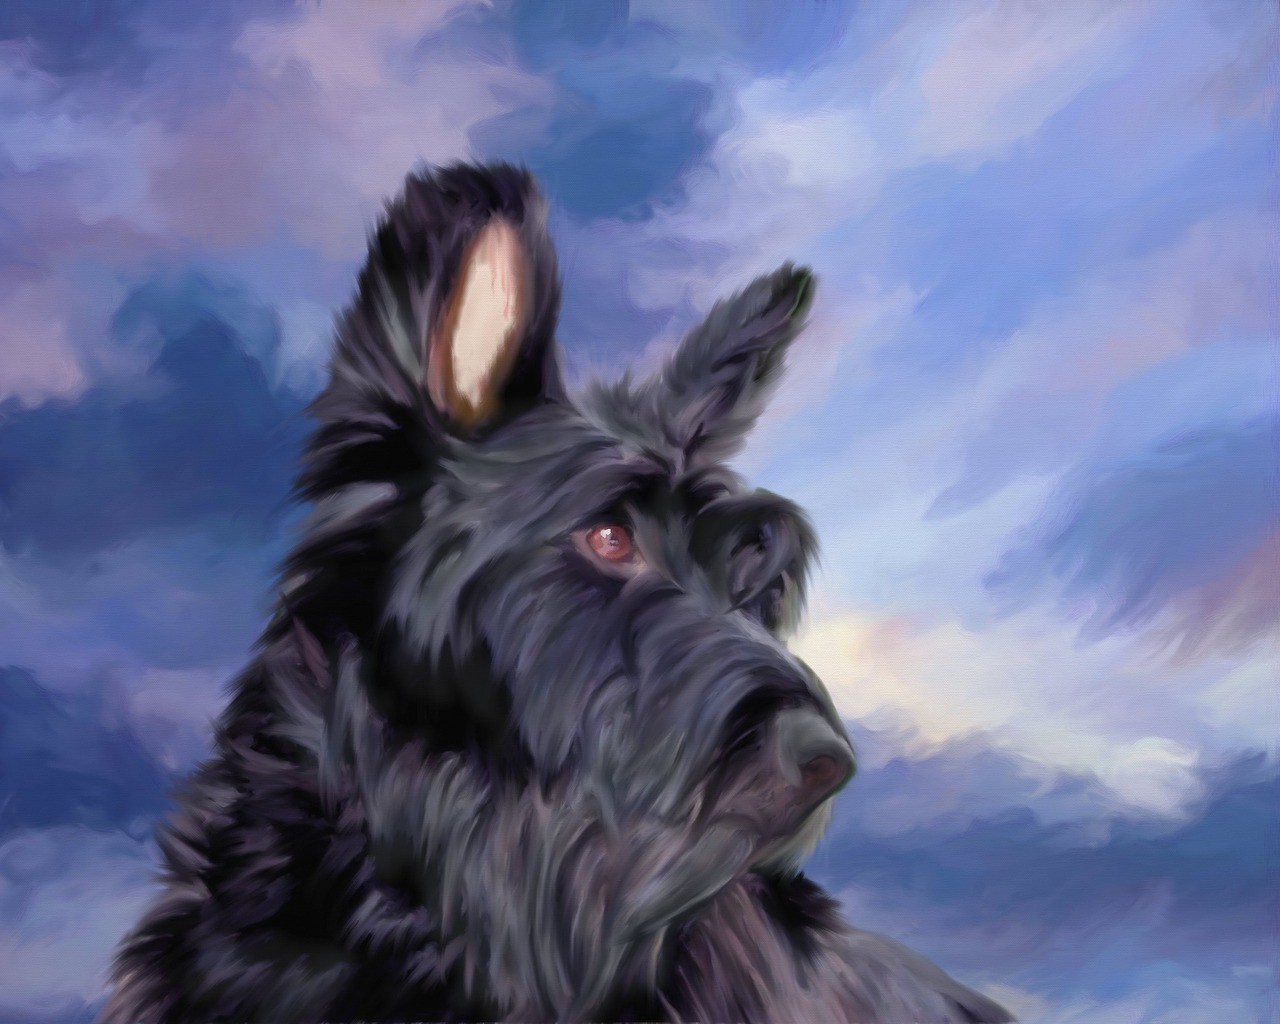 Scottish Terrier Puppies For Sale In Alabama